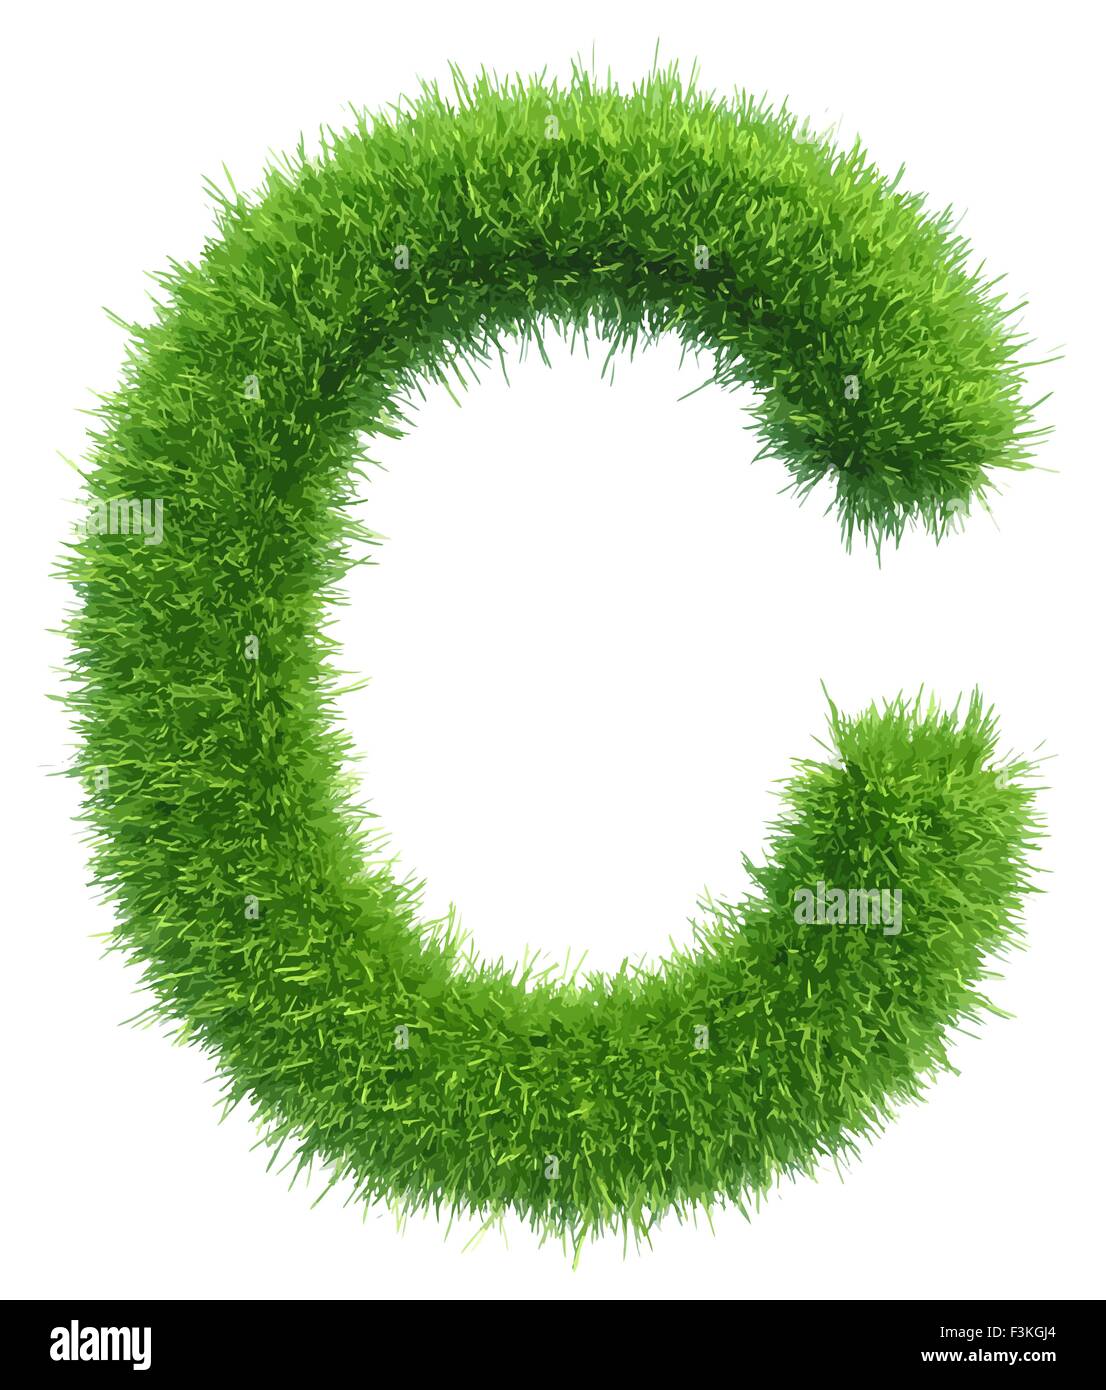 Vector capital letter C from grass on white background Stock Vector